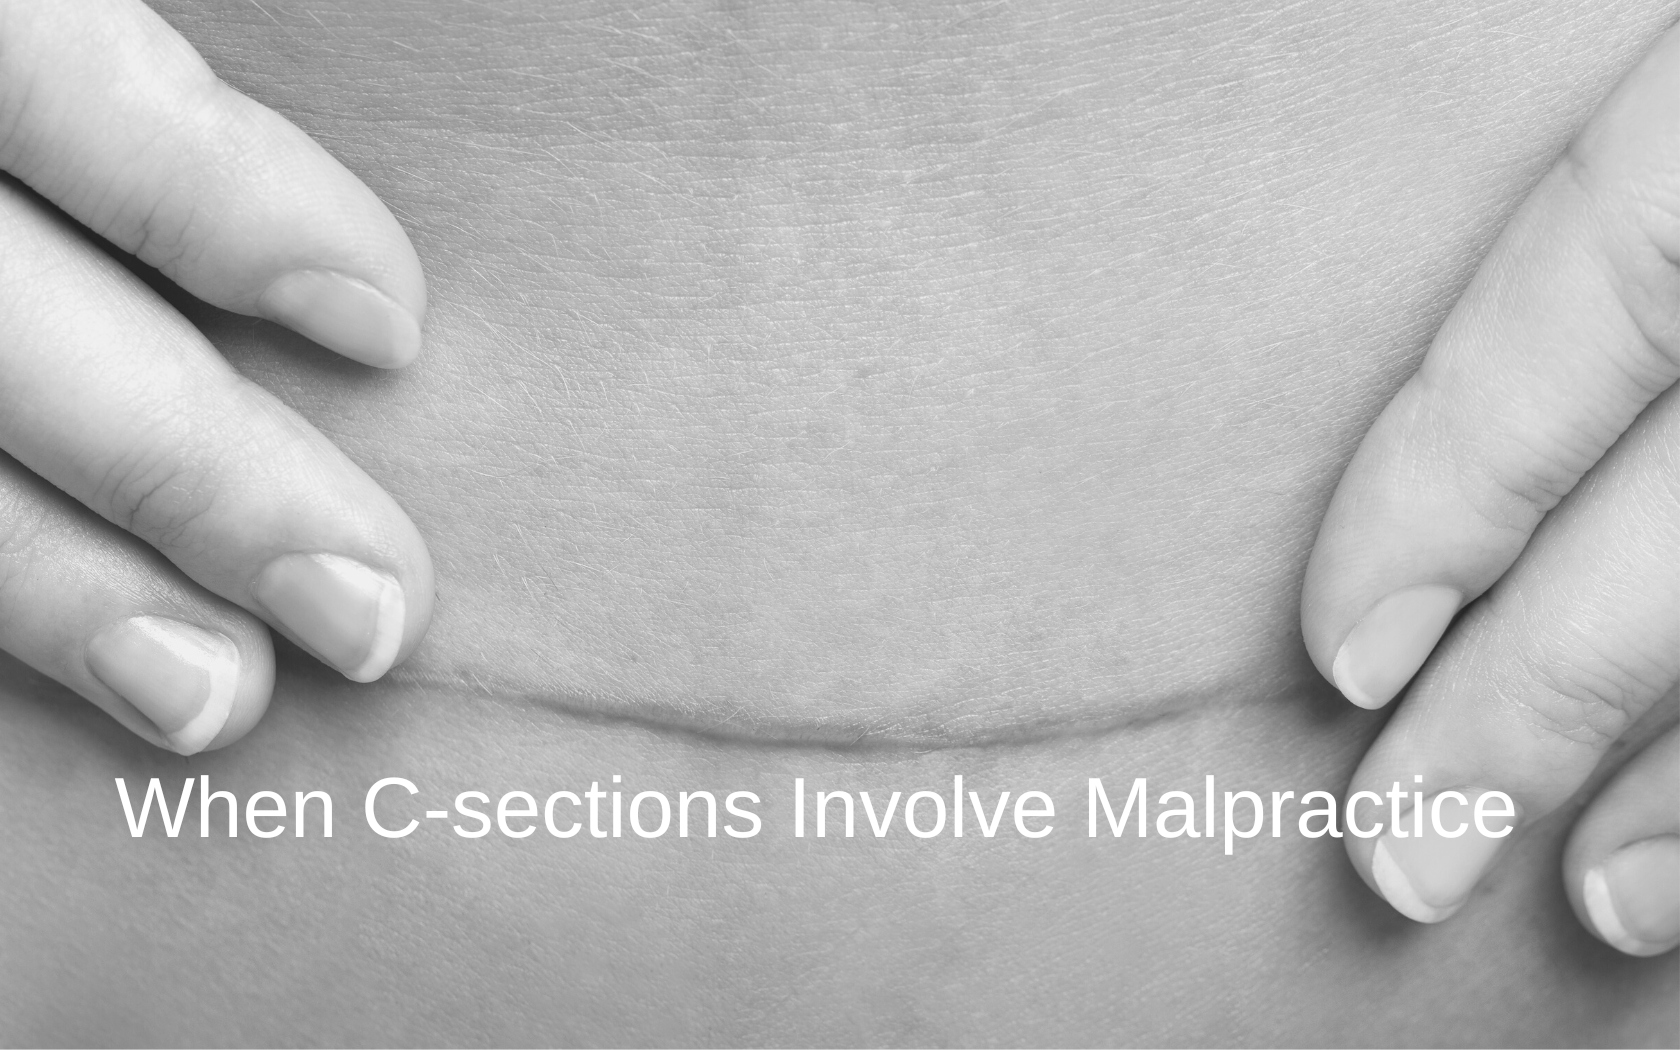 Internal Bleeding After C-section: A Consequence of Malpractice